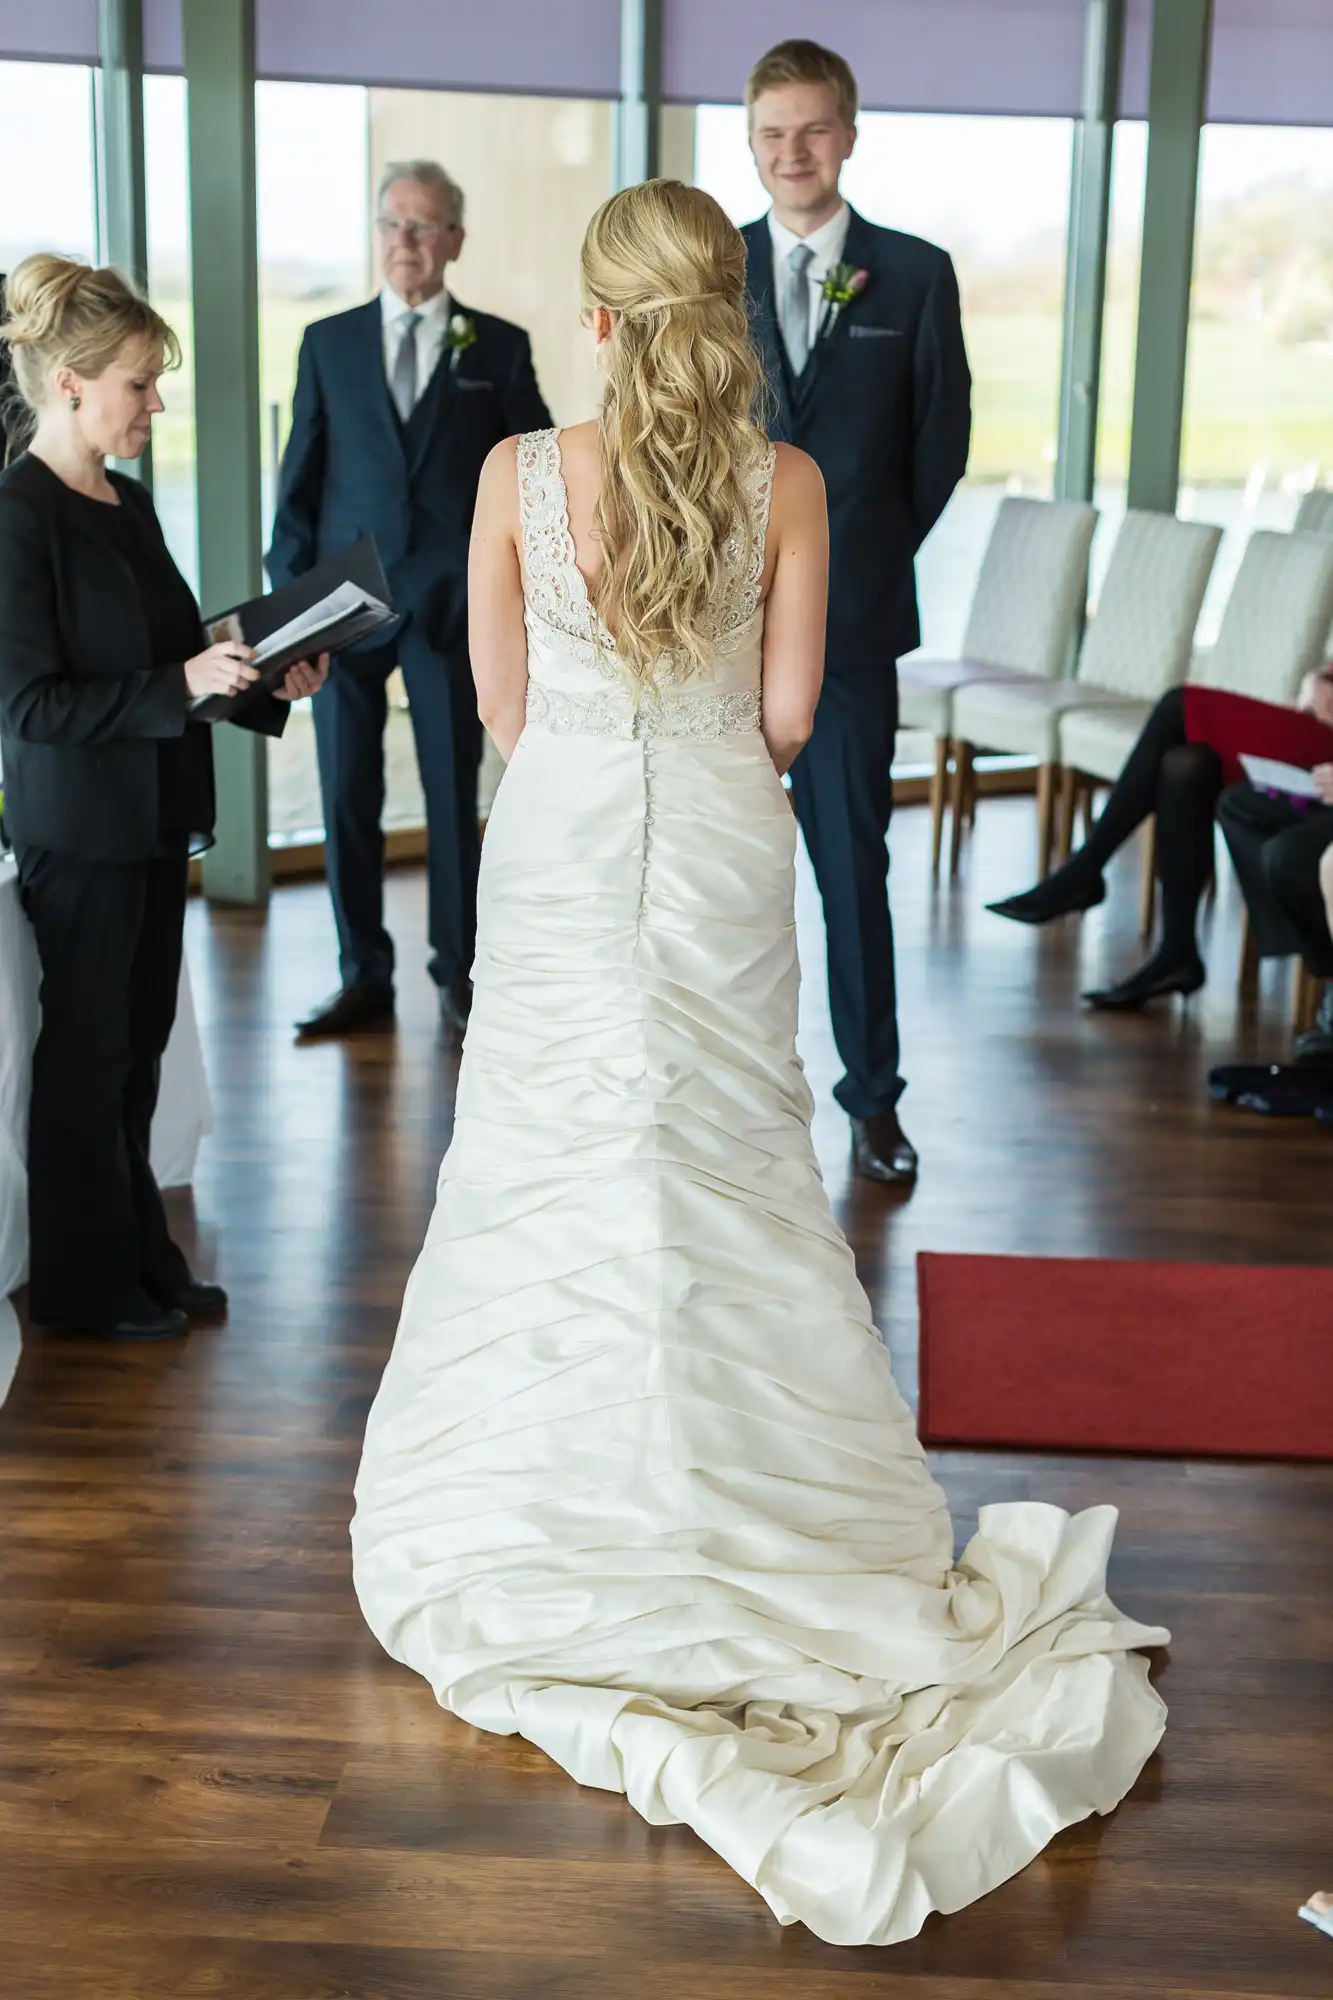 Bride in elegant white lace gown facing a groom and preacher during a wedding ceremony indoors, with guests seated in the background.